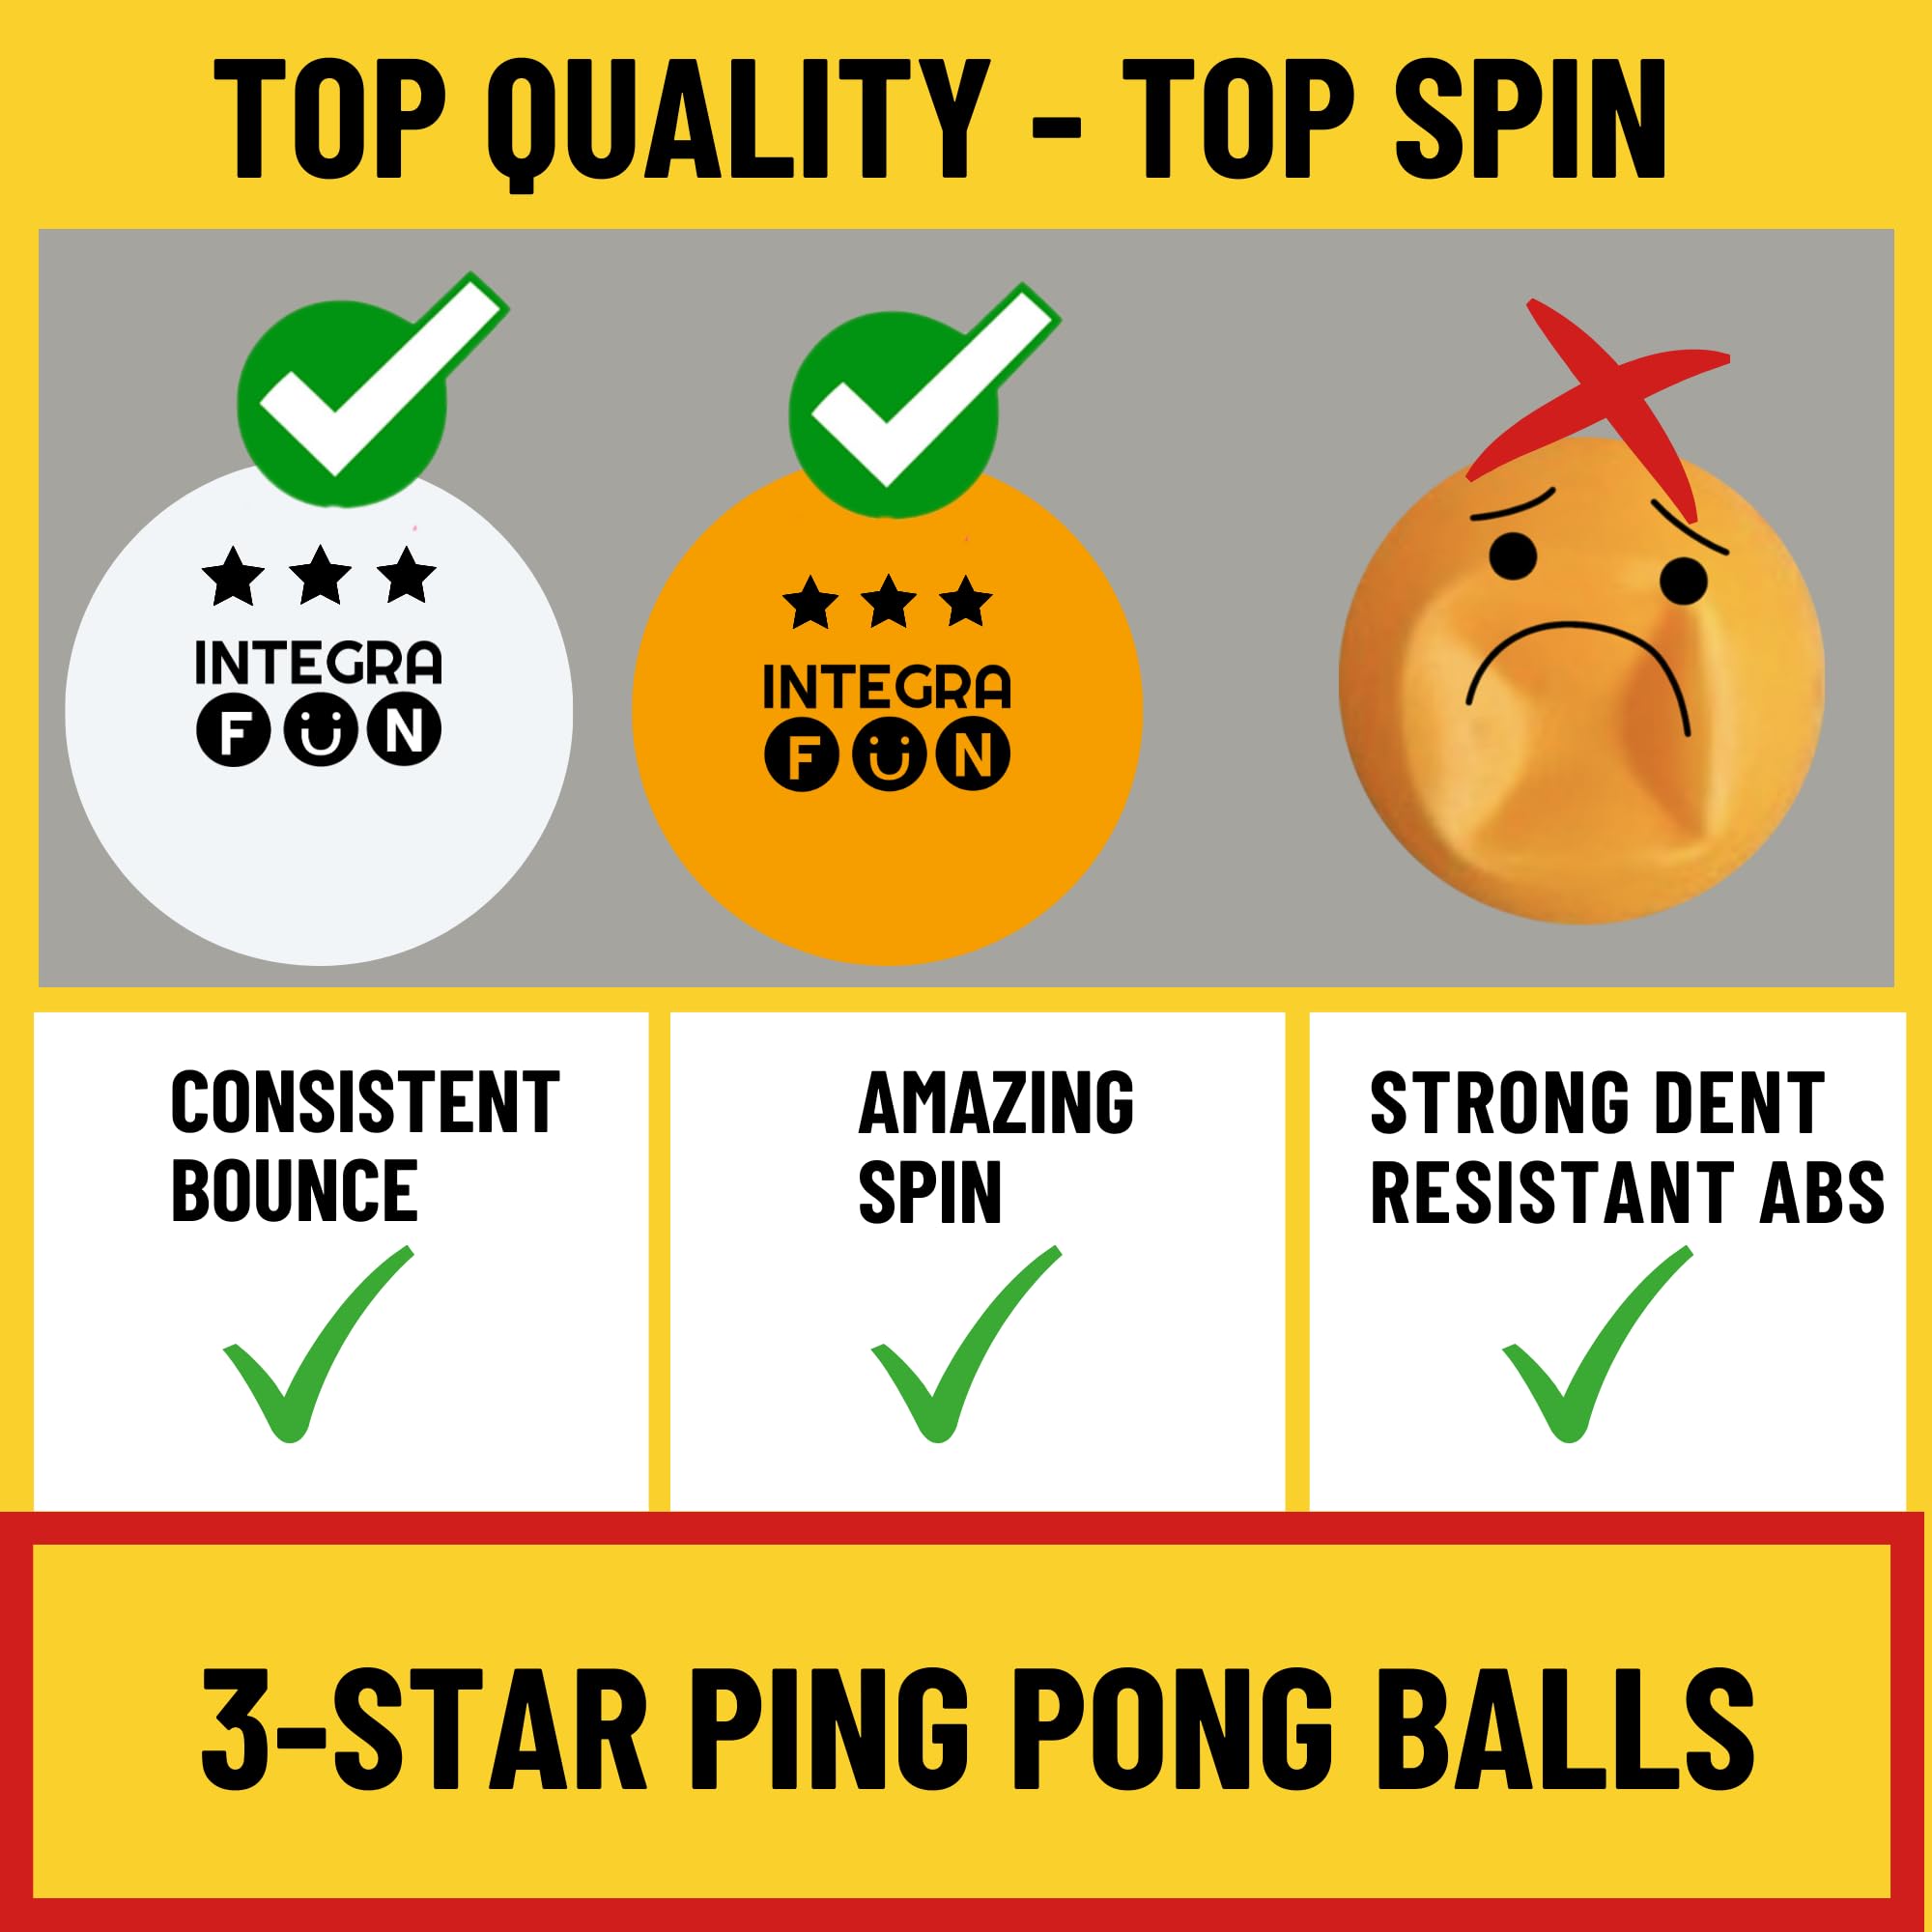 IntegraFun Pro Ping Pong Paddle Set with Ping Pong Net- Bracket Clamps,3-star Ping Pong Balls, Storage Case - Retractable Net and Post Set Adjustable to any Table - Indoor Outdoor Games for Family